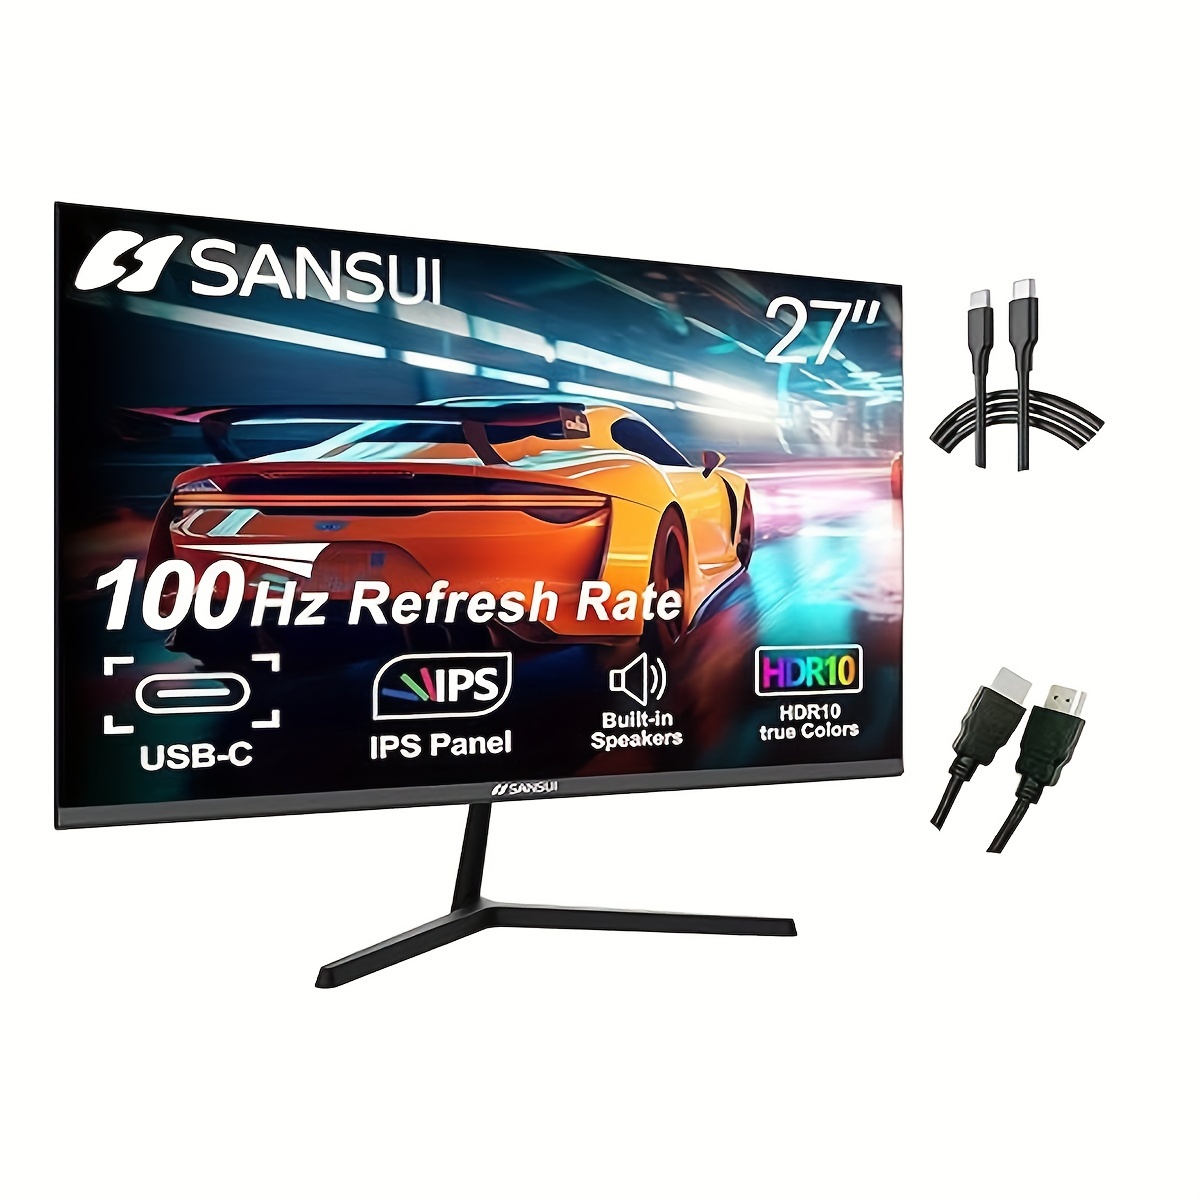 

Sansui Computer Monitors 27 Inch 100hz Ips Usb Type-c Fhd 1080p Hdr10 Built-in Speakers Hdtv Dp Game Rts/fps Tilt Adjustable For Working And Gaming (es-27x3 Type-c Cable & Hdtv Cable Included)